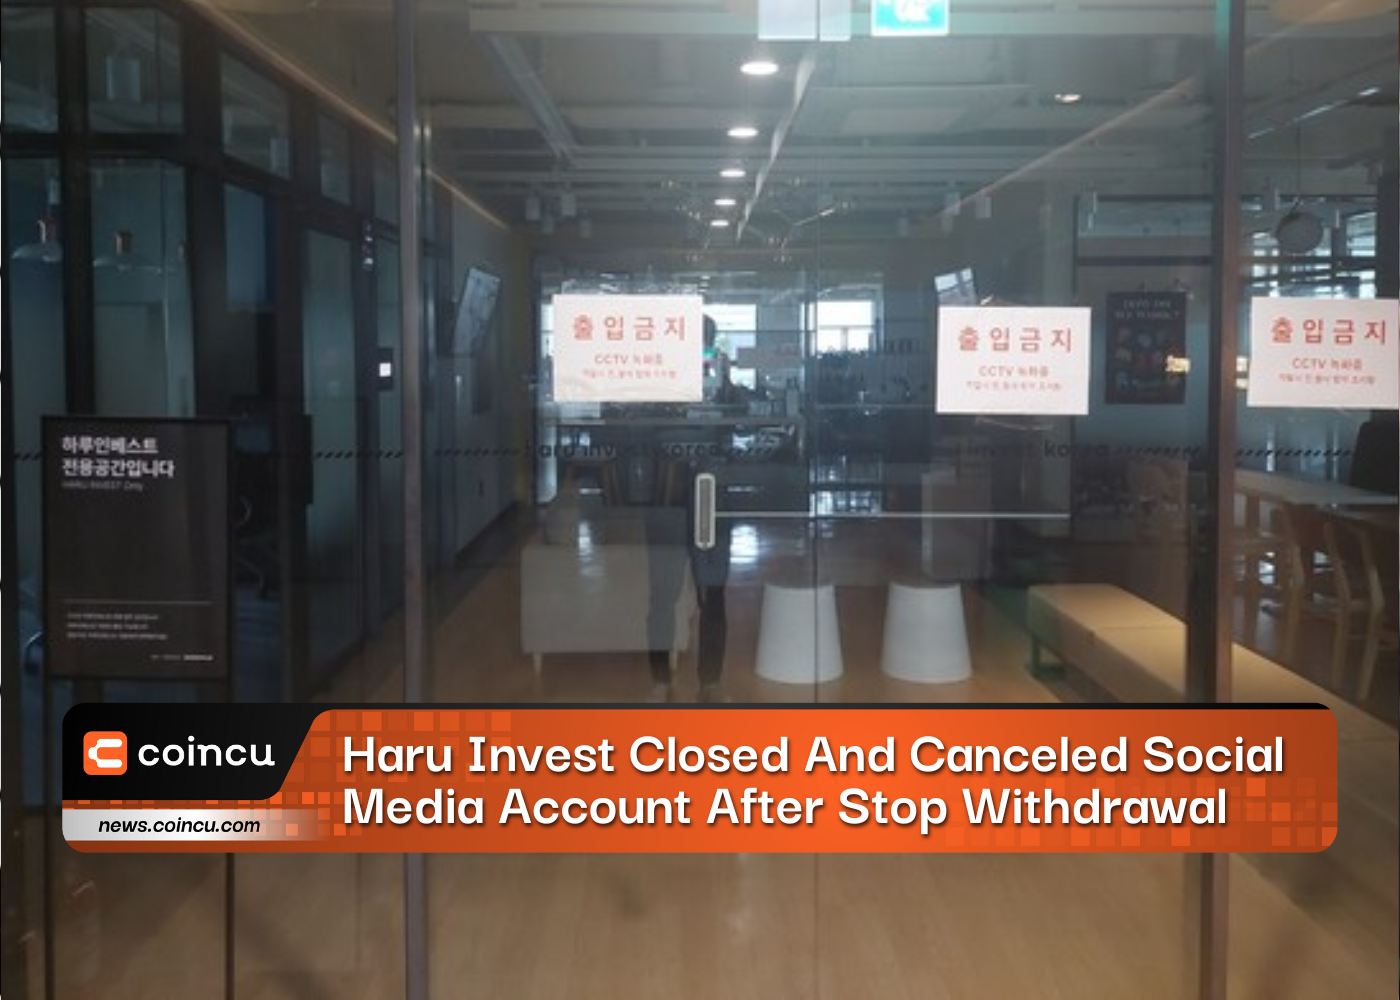 Haru Invest Closed And Canceled Social Media Account After Stop Withdrawal: Report